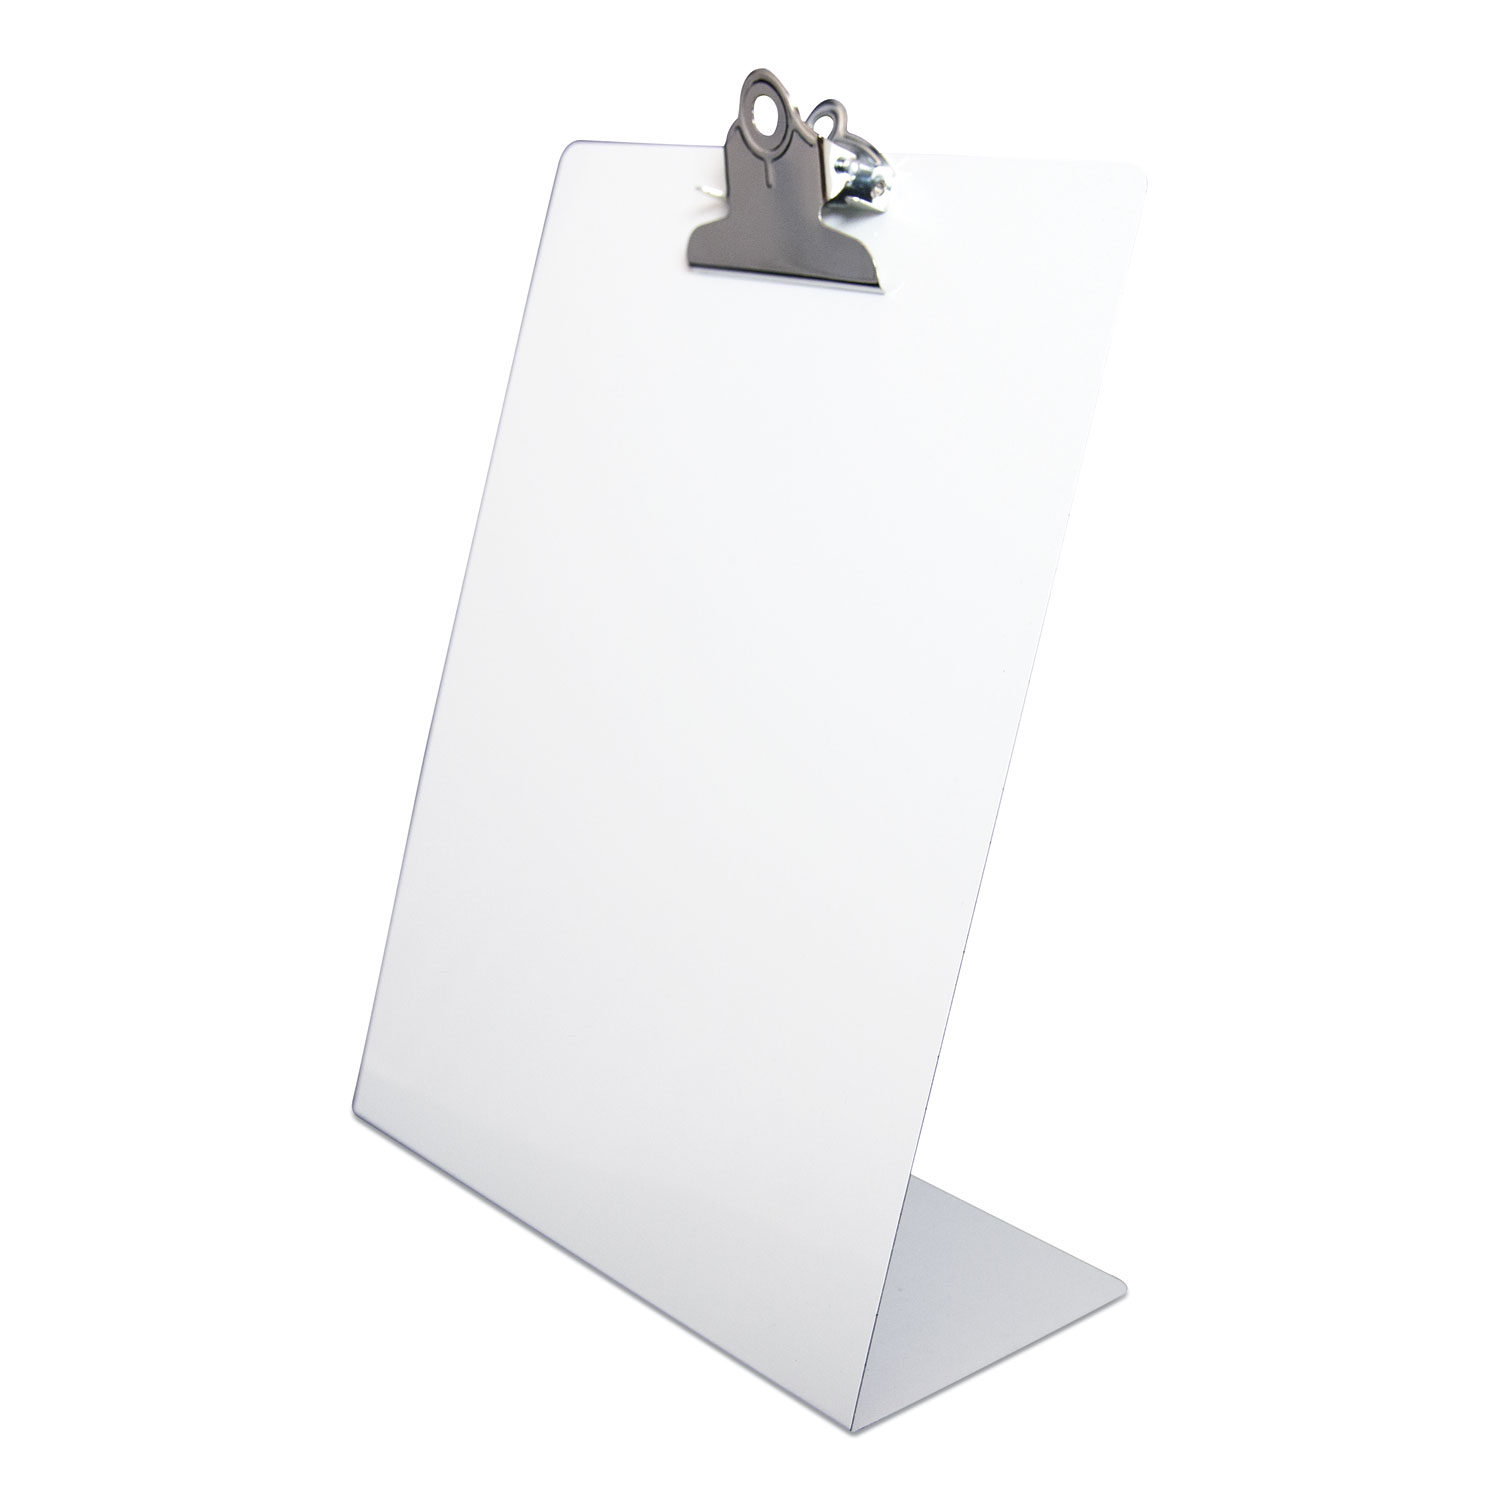  Saunders 22525 Free Standing Clipboard, Portrait, 1 Clip Capacity, 8.5 x 11 Sheets, White (SAU22525) 